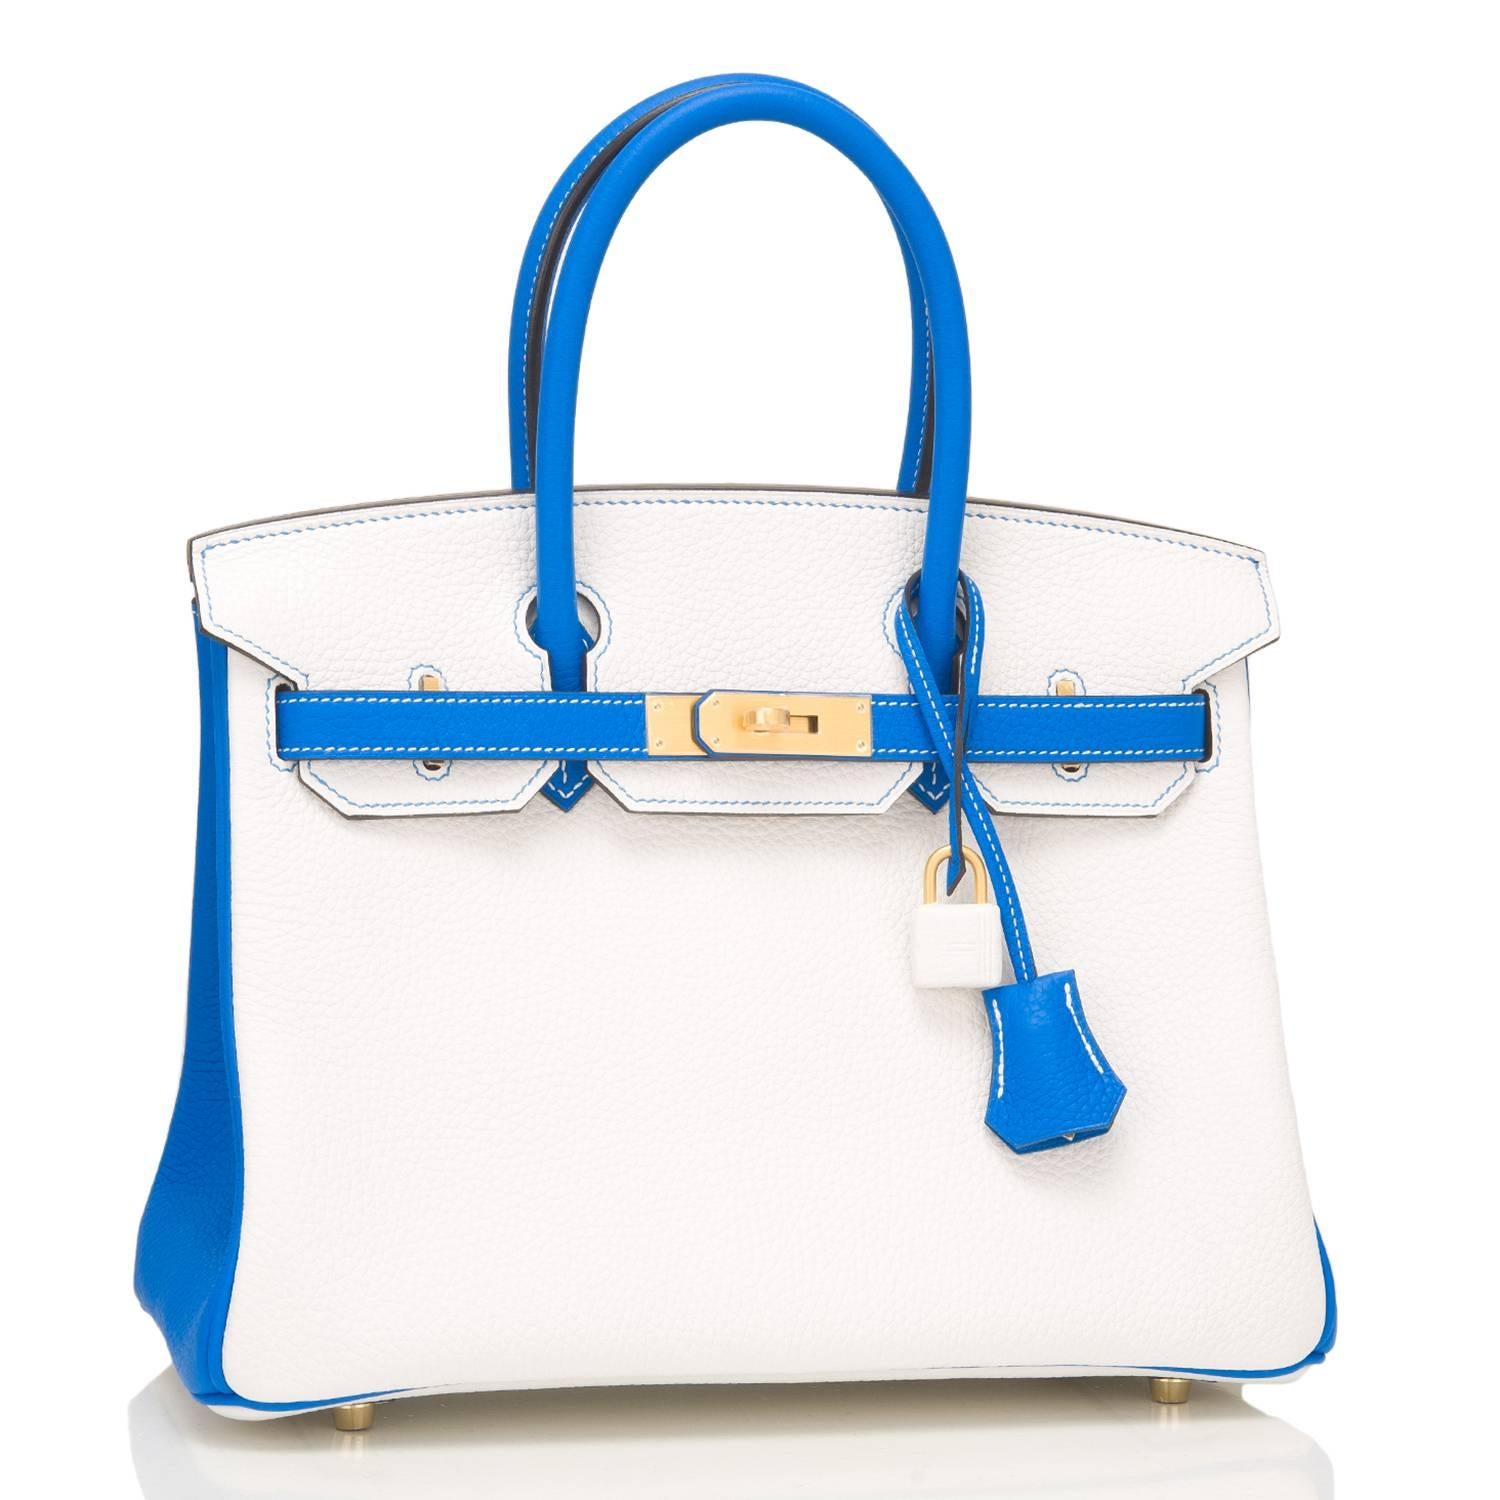 Hermes Horseshoe Stamp (HSS) Birkin 30cm of White and Blue Hydra clemence leather with brushed gold hardware.

This Special Order Birkin has contrasting stitching, a front toggle closure, a clochette with lock and two keys, and double rolled